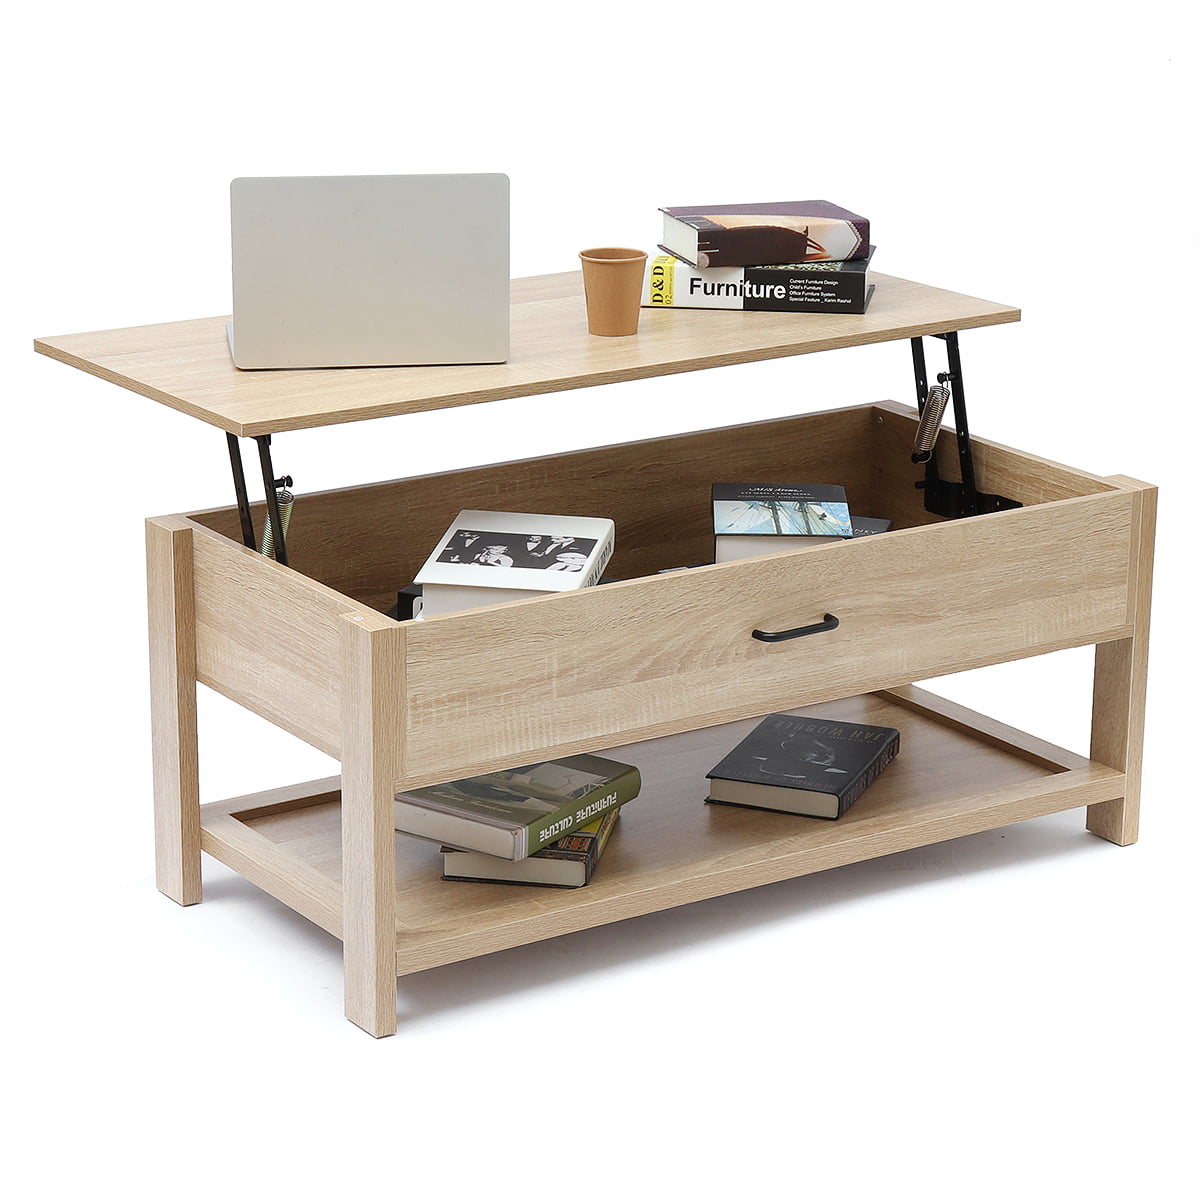 Lift Top Coffee Table Laptop Tables with Hidden Storage ...